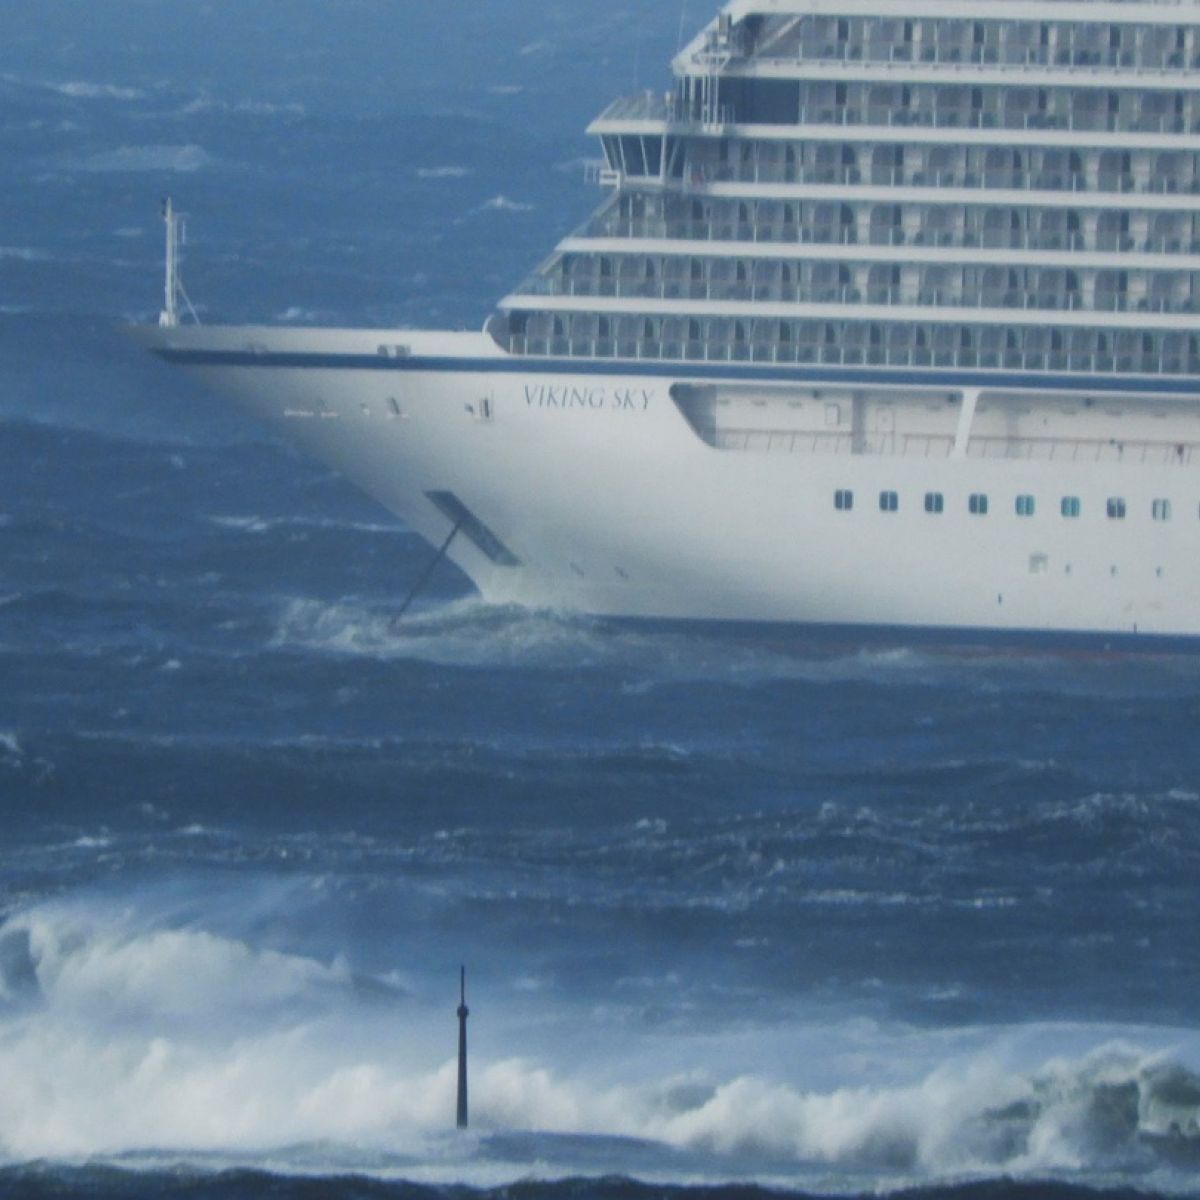 Stricken Cruise Ship Reaches Norway Port After Near Disaster